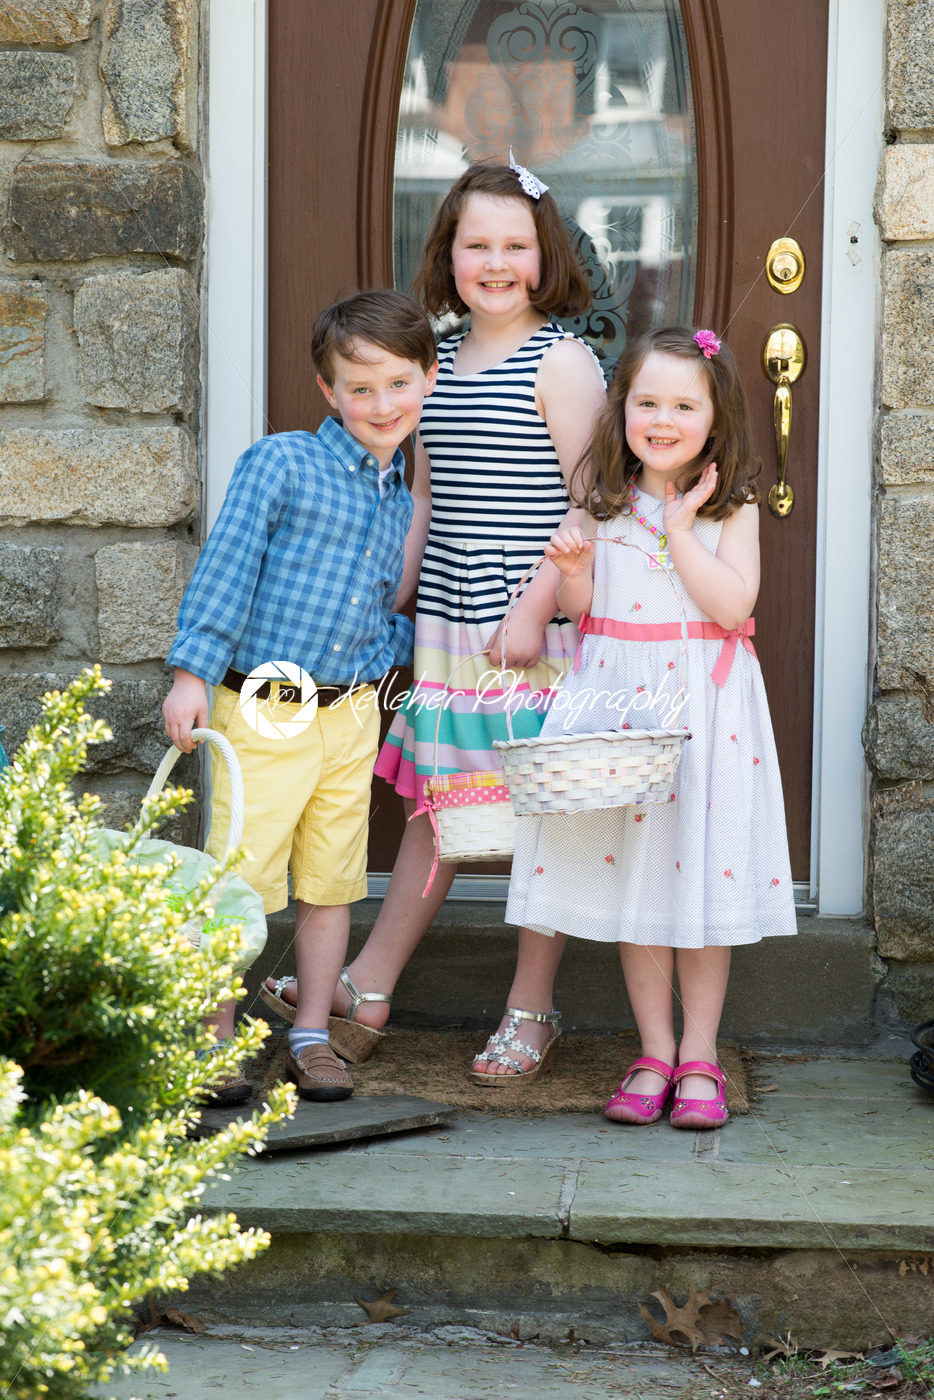 Young Siblings Outside Dressed Up for Easter holding Baskets - Kelleher Photography Store